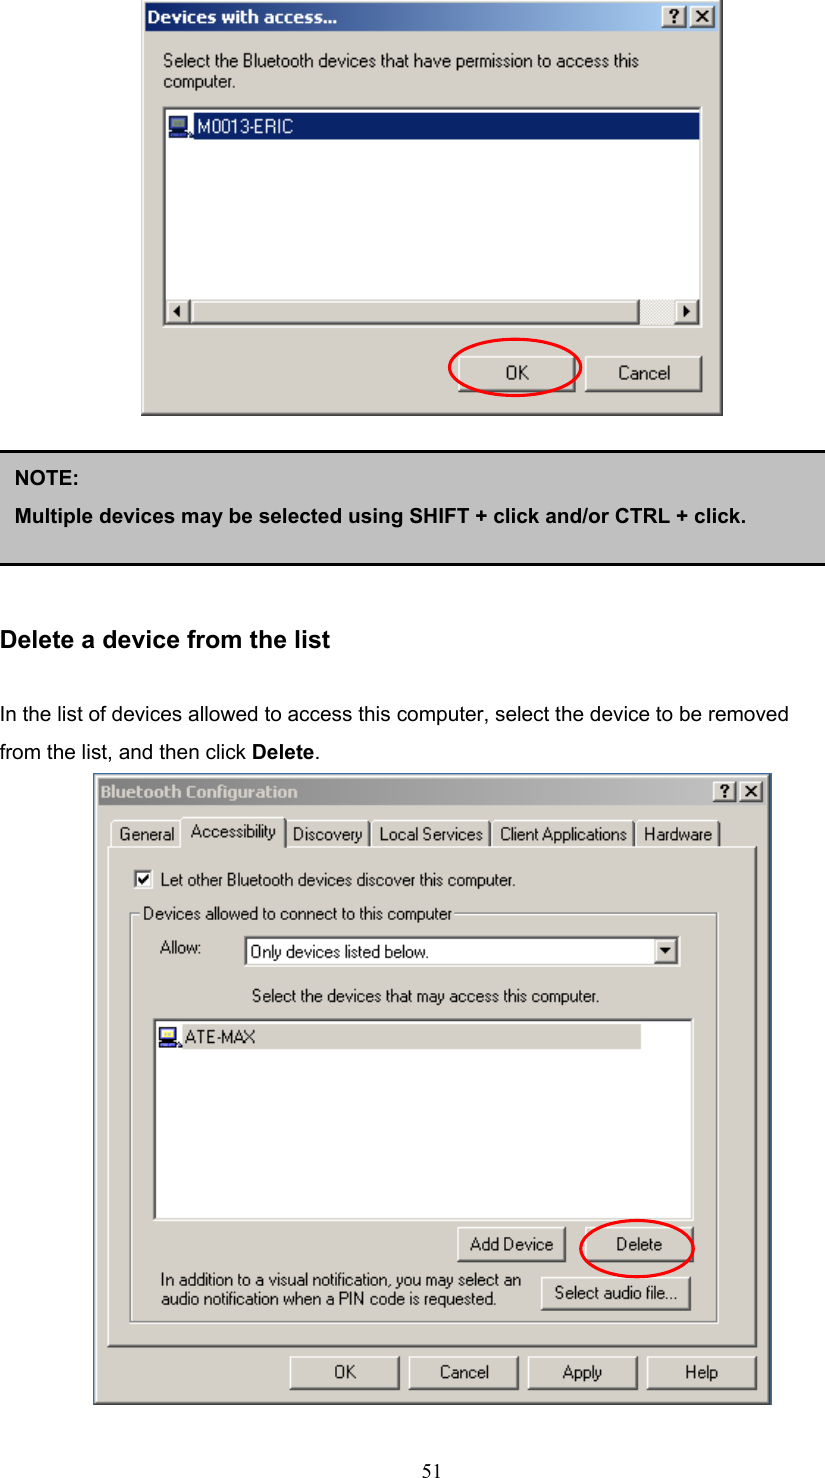  51       Delete a device from the list  In the list of devices allowed to access this computer, select the device to be removed from the list, and then click Delete.  NOTE:  Multiple devices may be selected using SHIFT + click and/or CTRL + click. 